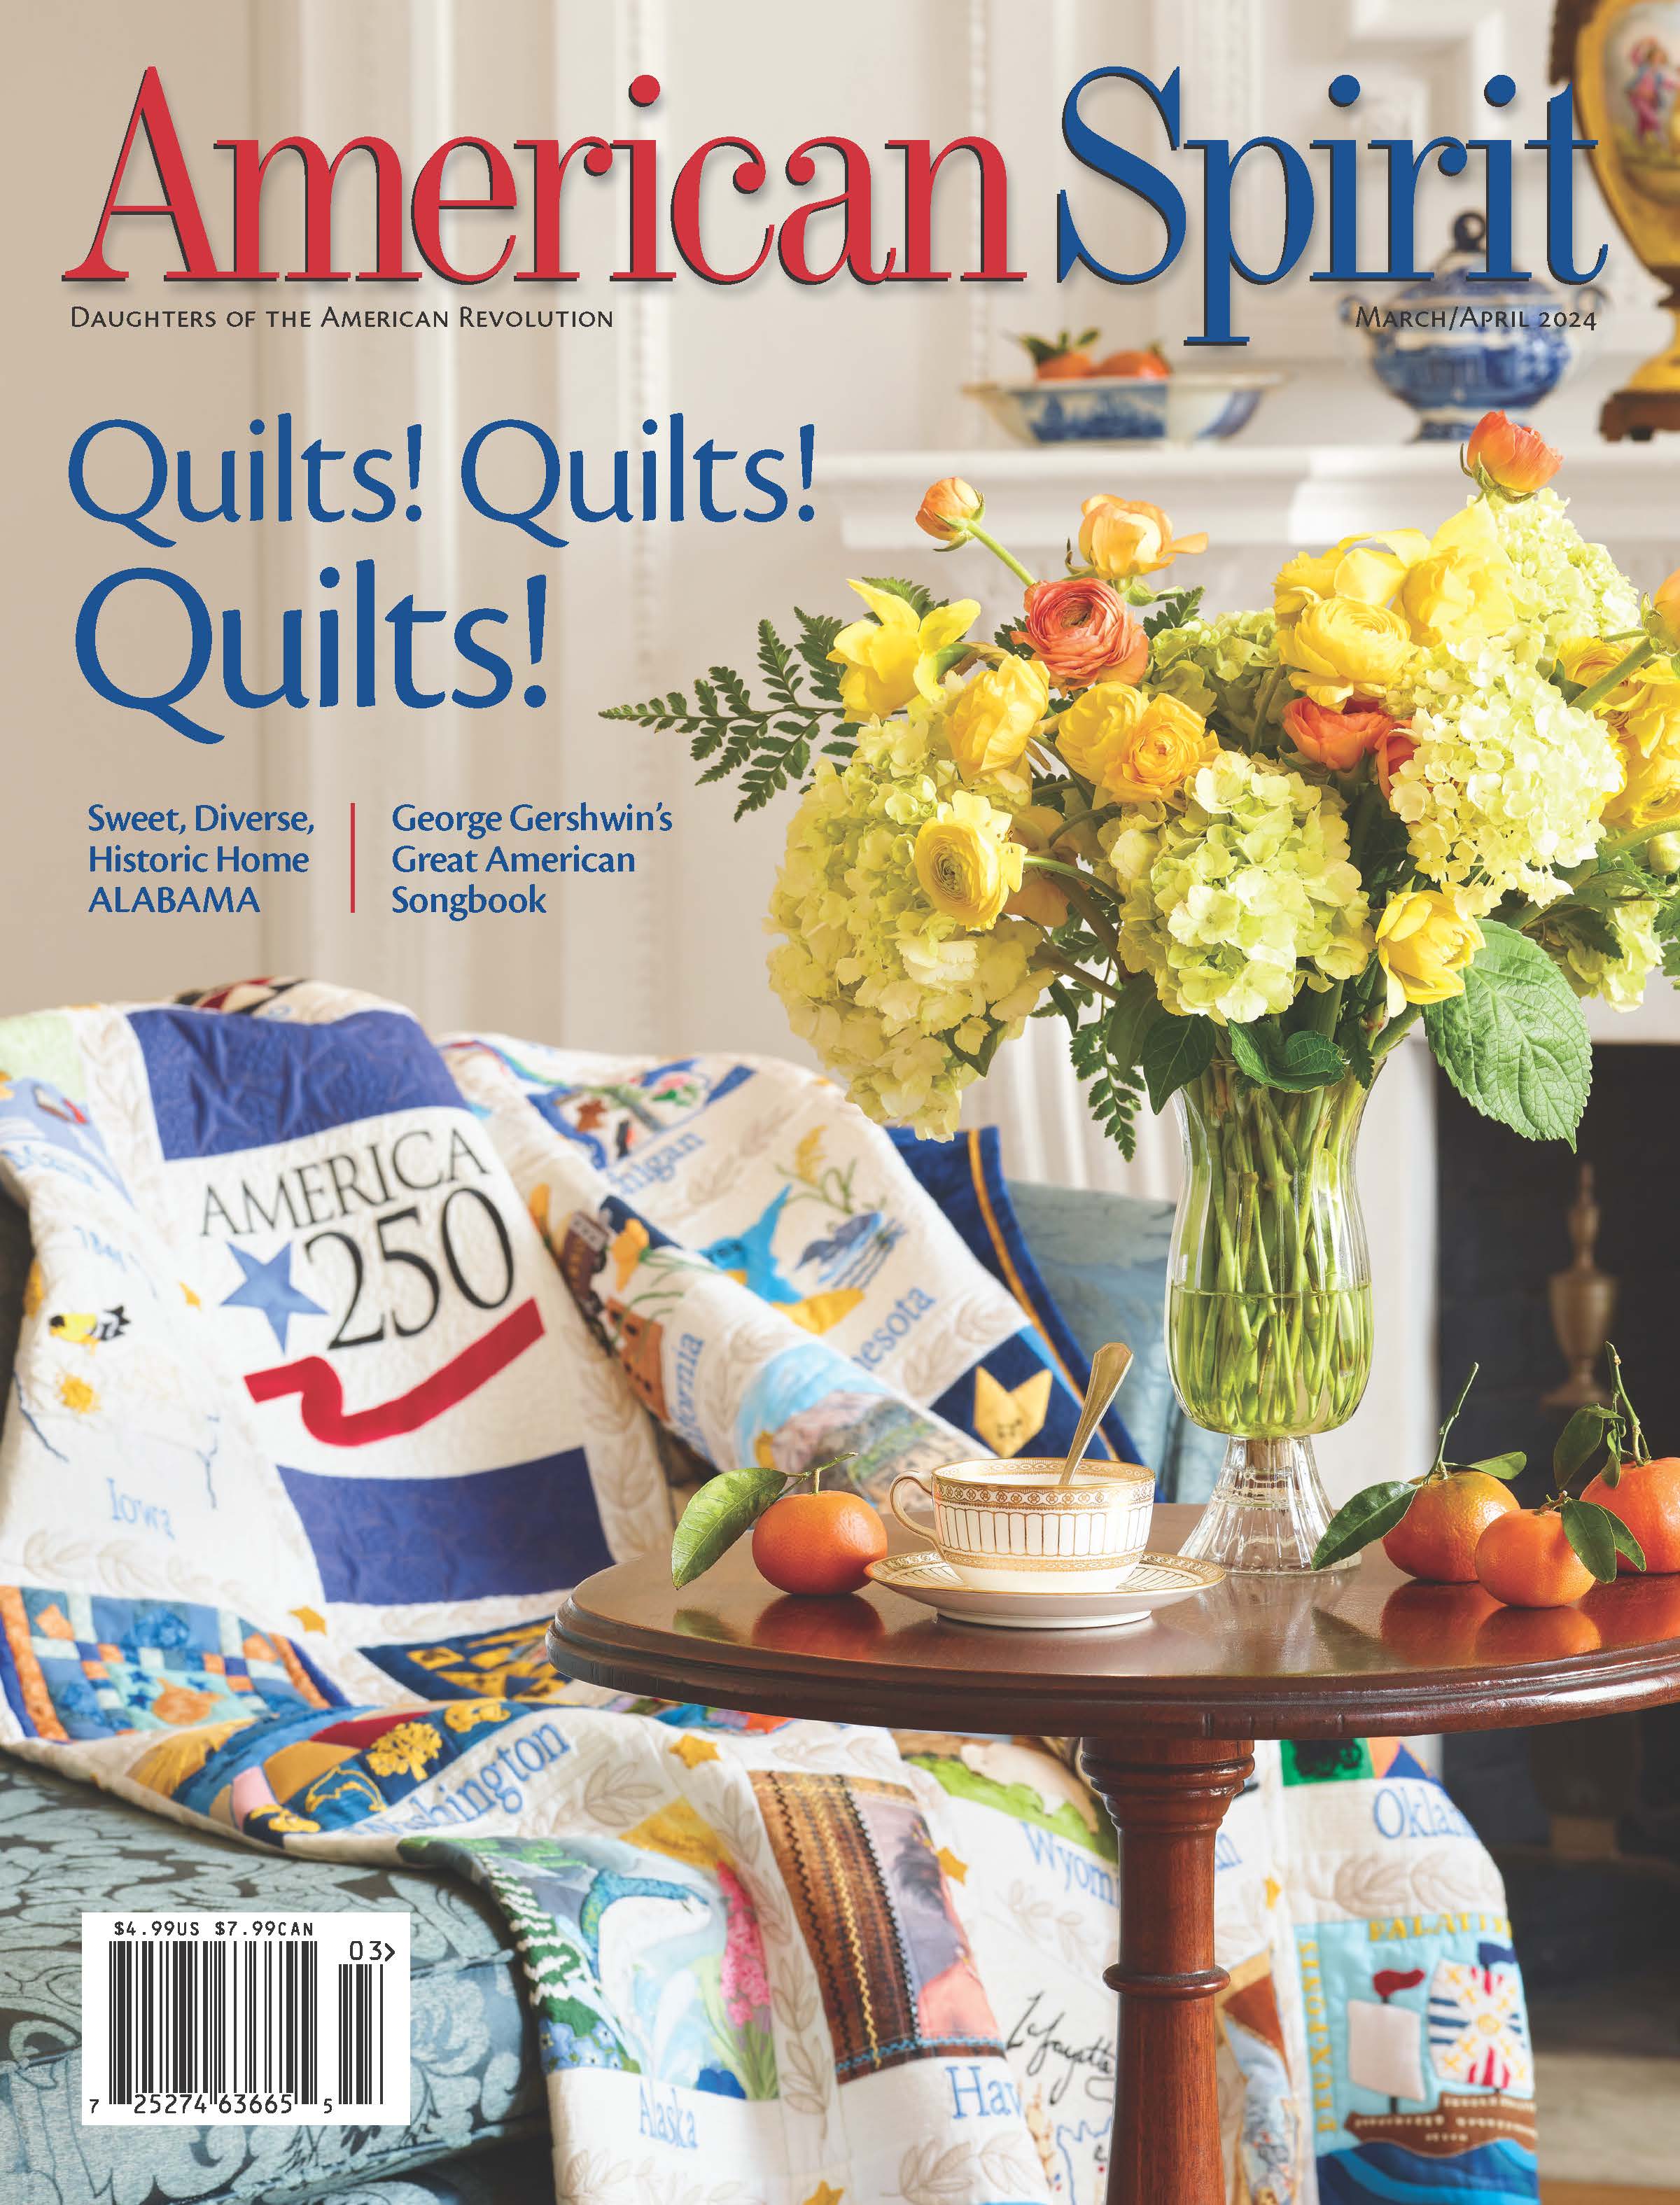 American Spirit Magazine Cover with America250! Quilt